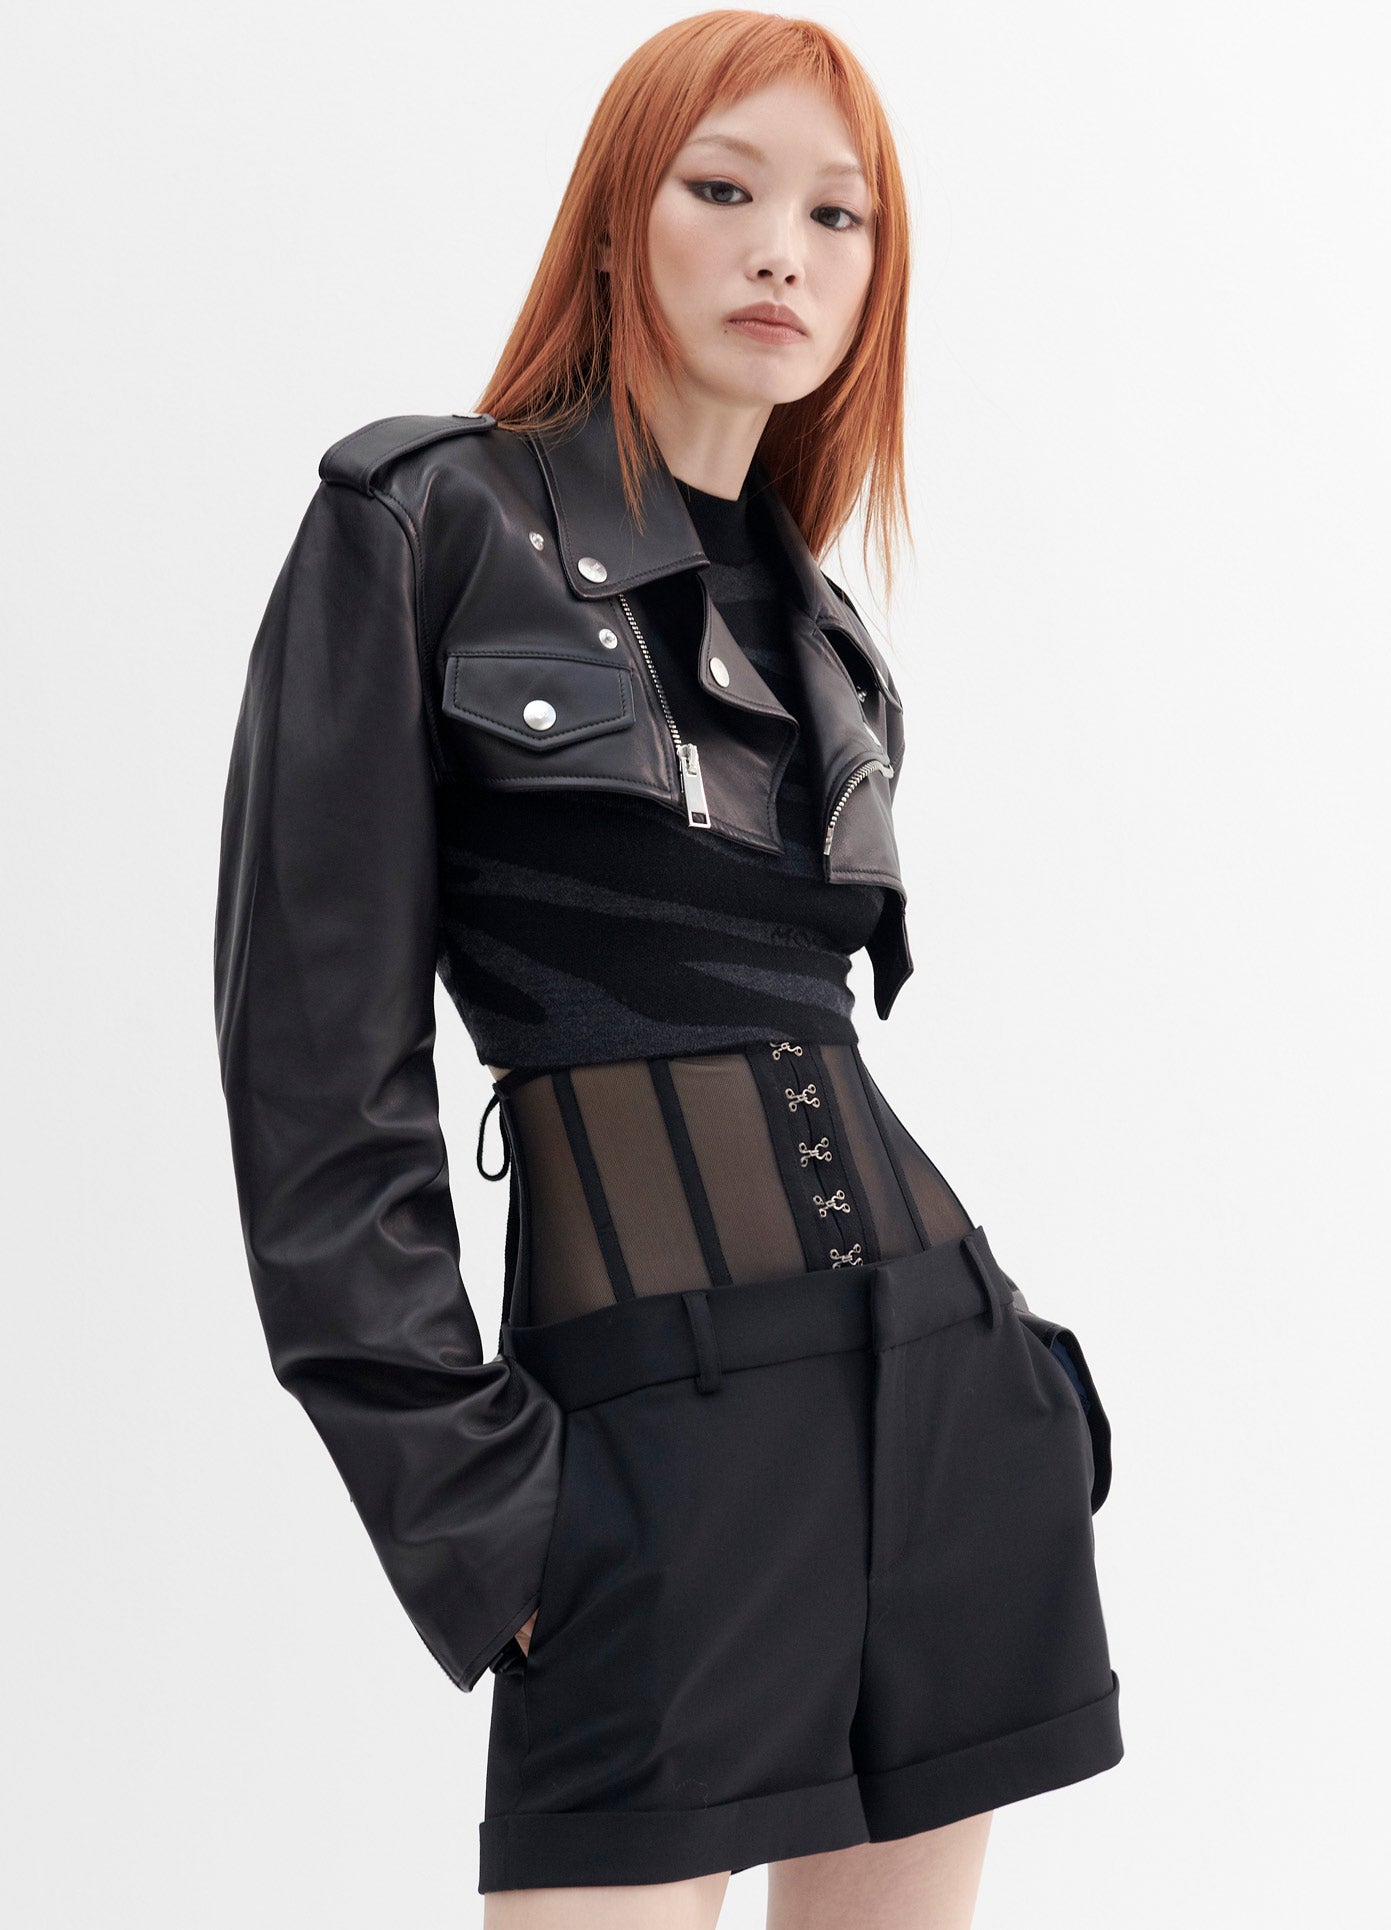 MONSE Leather Cropped Jacket in Black on Model Side View